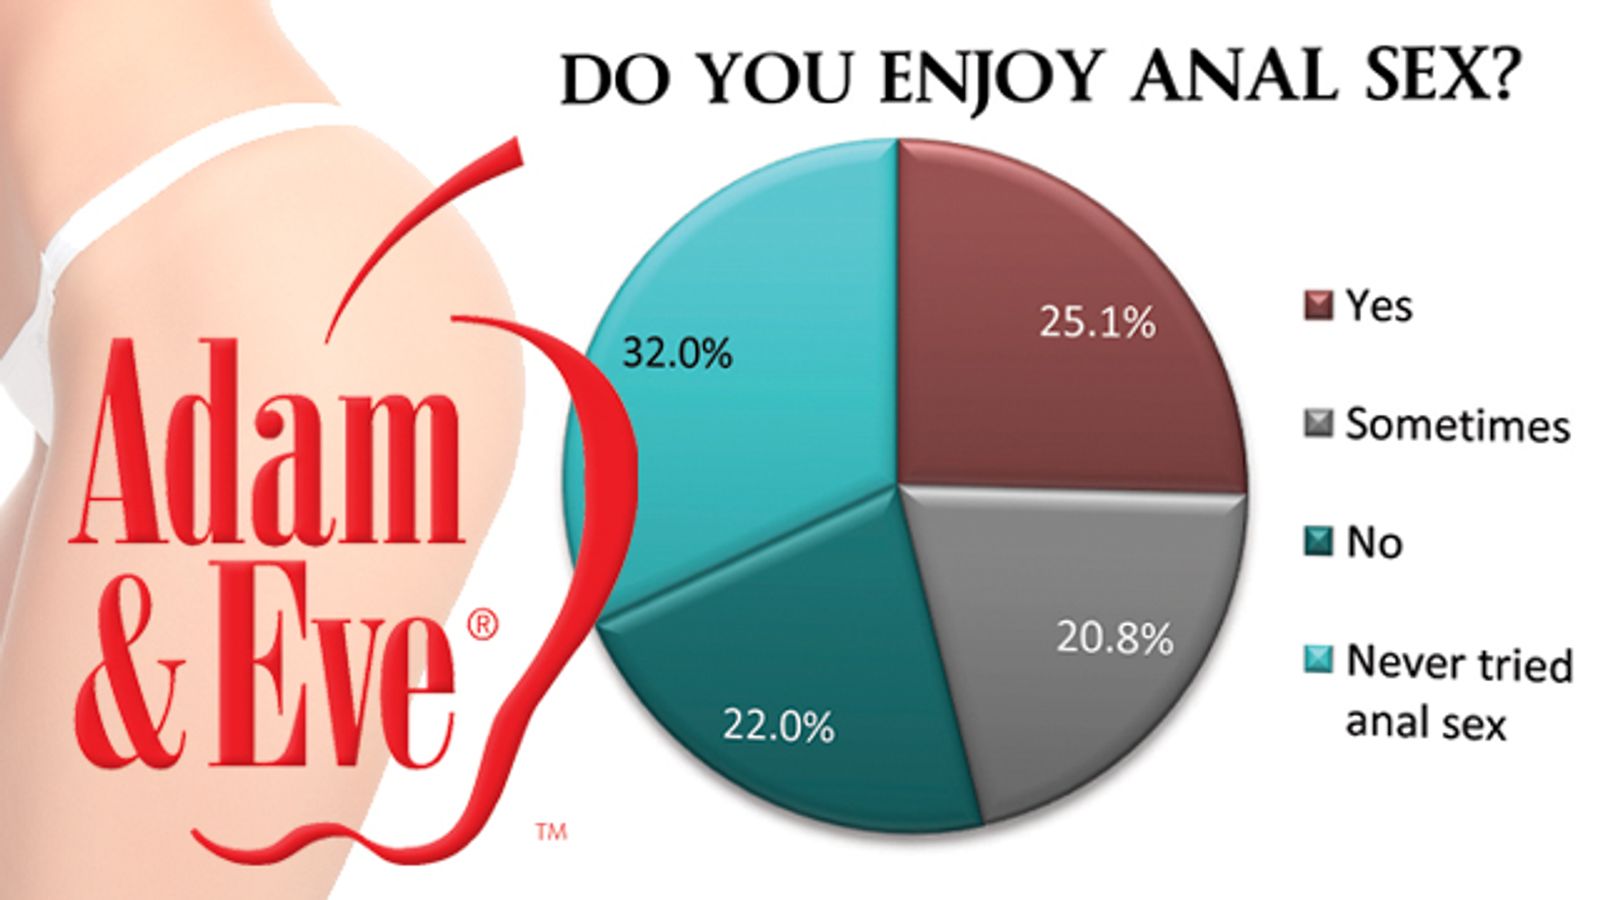 New Adam & Eve Survey Finds More Americans Enjoying Anal